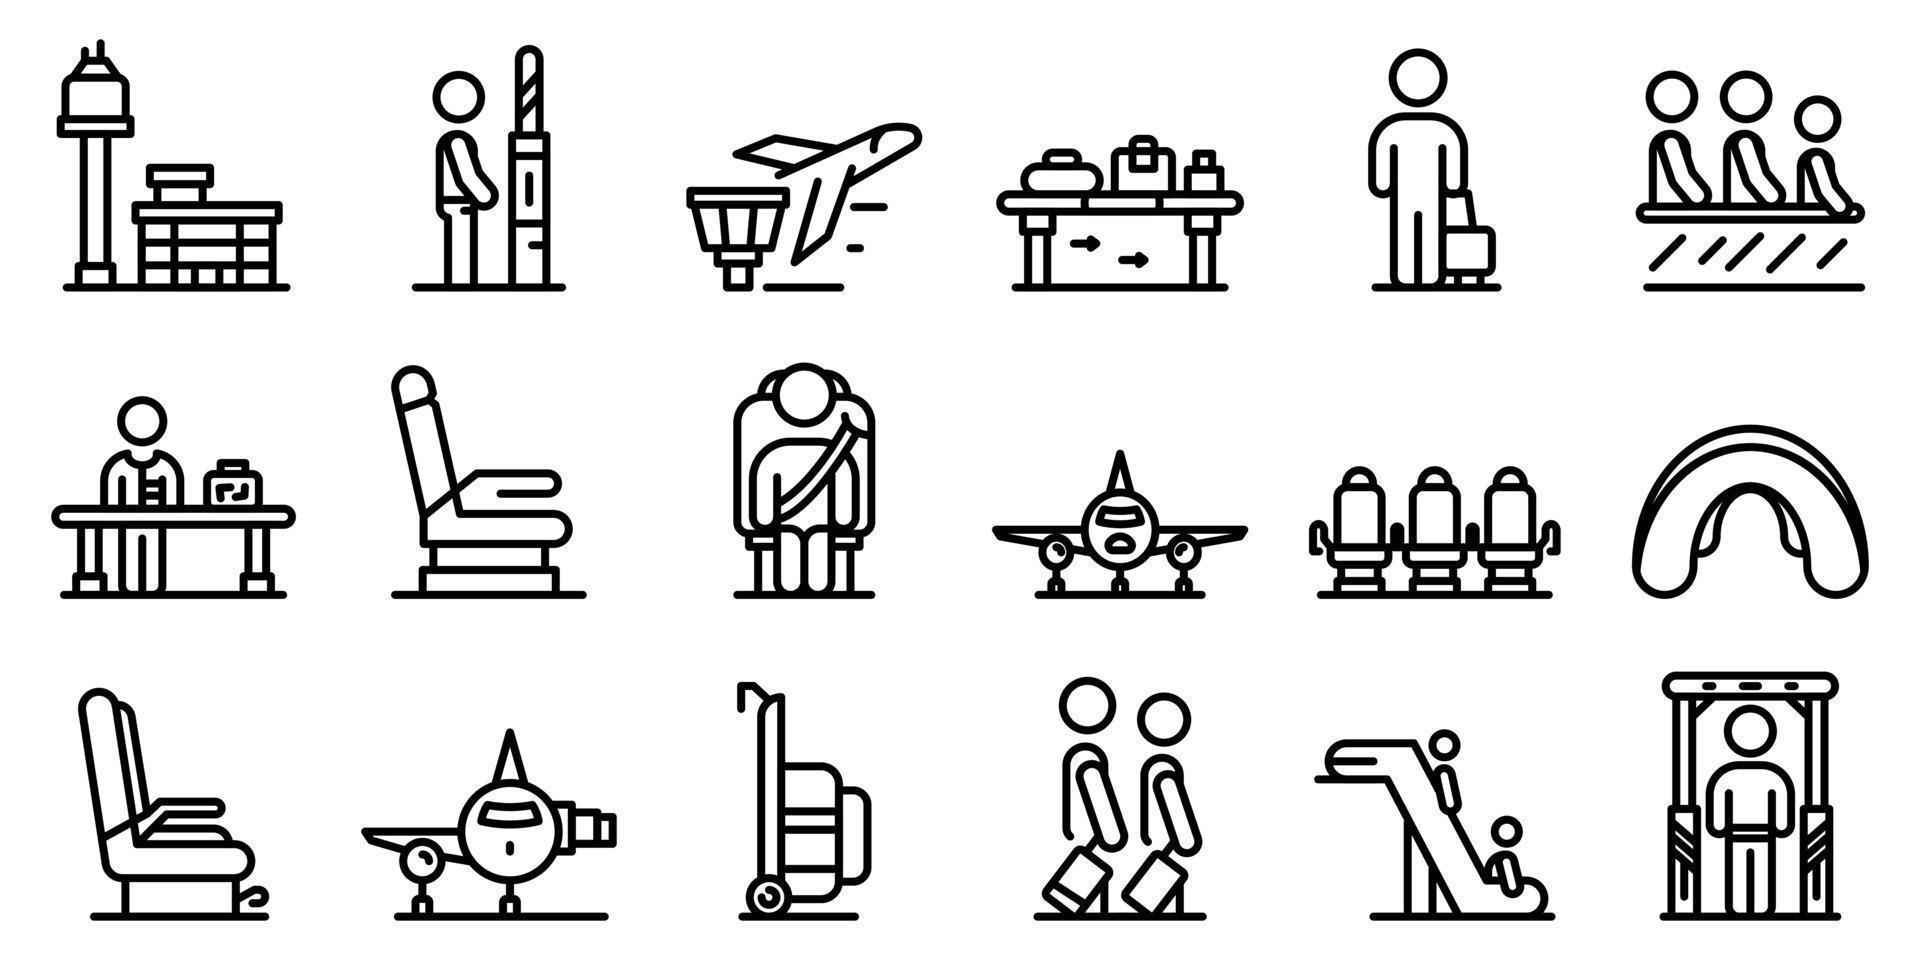 Airline passengers icons set, outline style vector